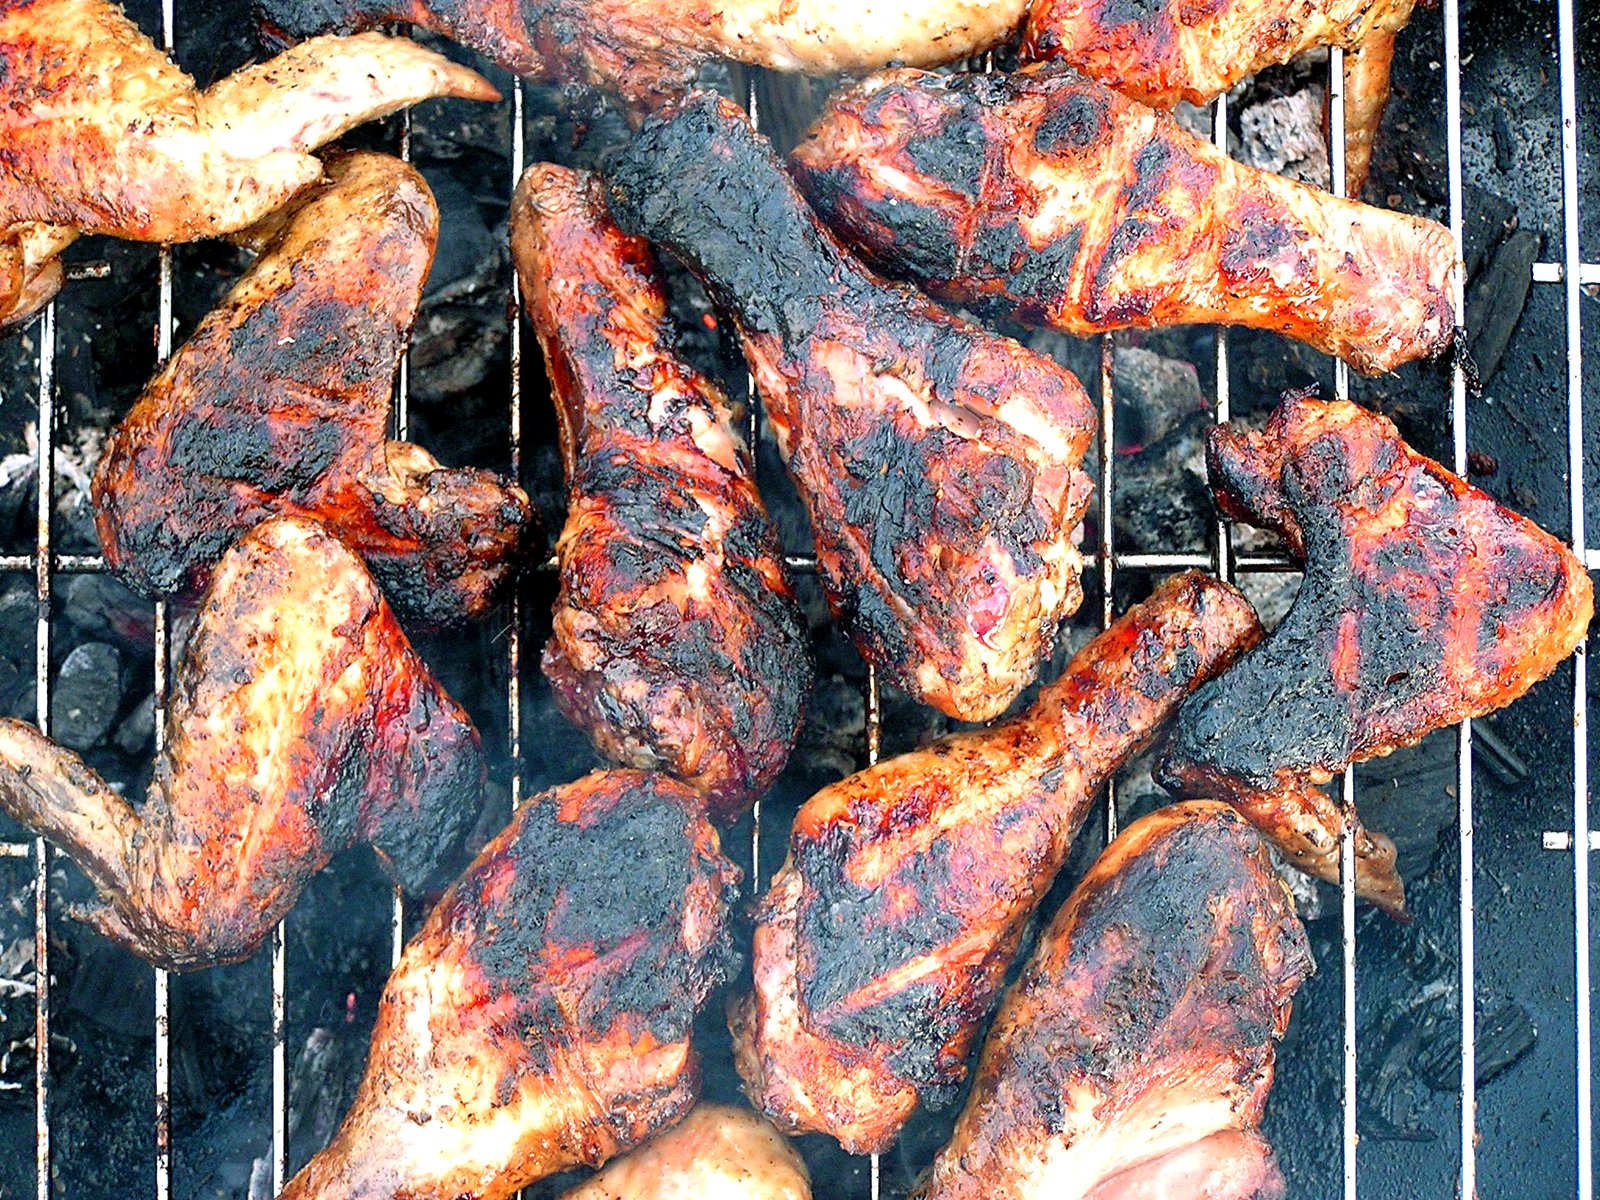 several pork legs cooking on a bbq grill